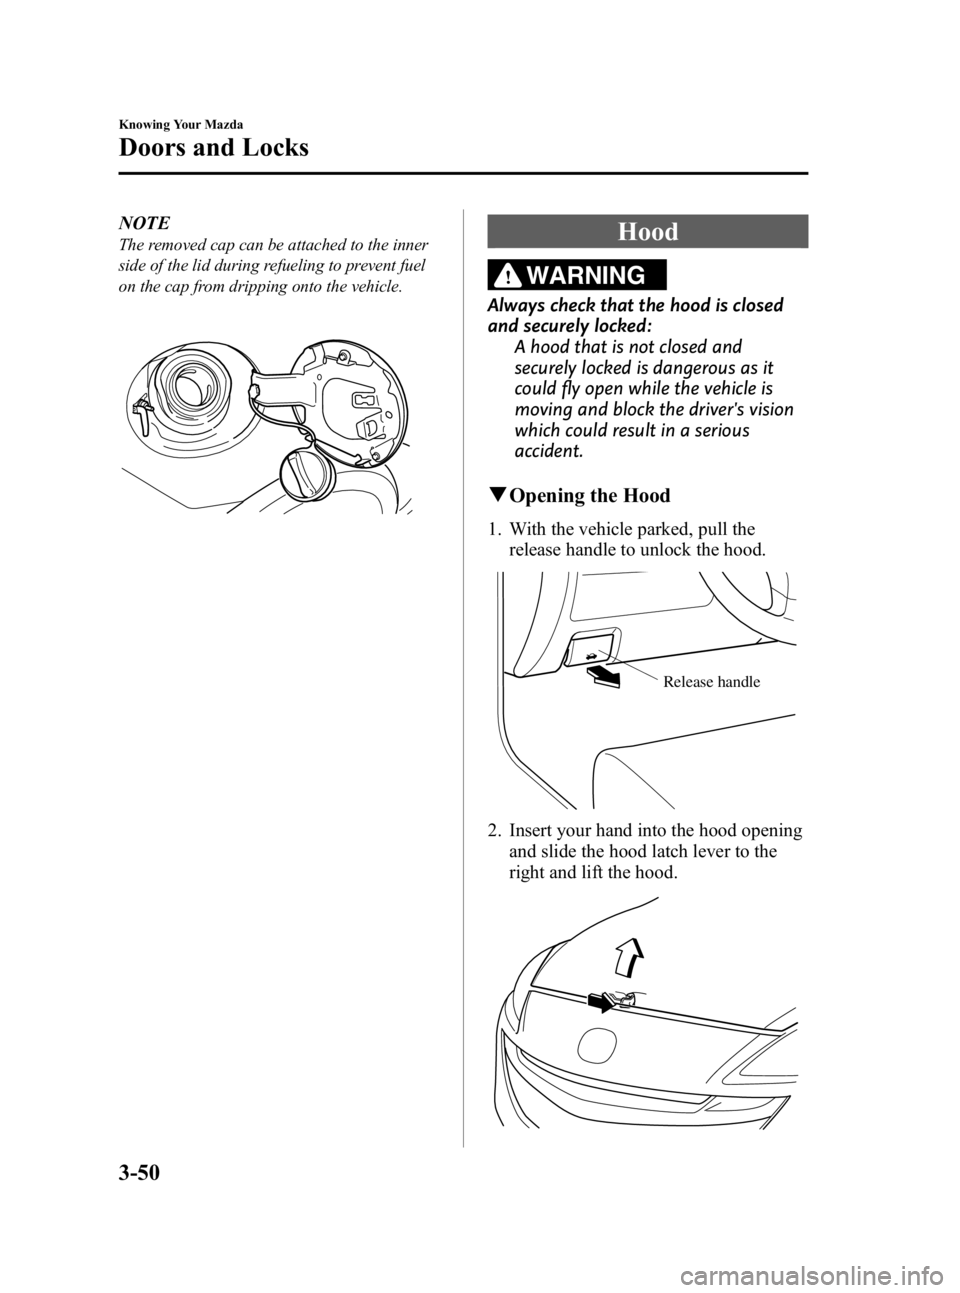 MAZDA MODEL 3 5-DOOR 2010  Owners Manual Black plate (126,1)
NOTE
The removed cap can be attached to the inner
side of the lid during refueling to prevent fuel
on the cap from dripping onto the vehicle.Hood
WARNING
Always check that the hood